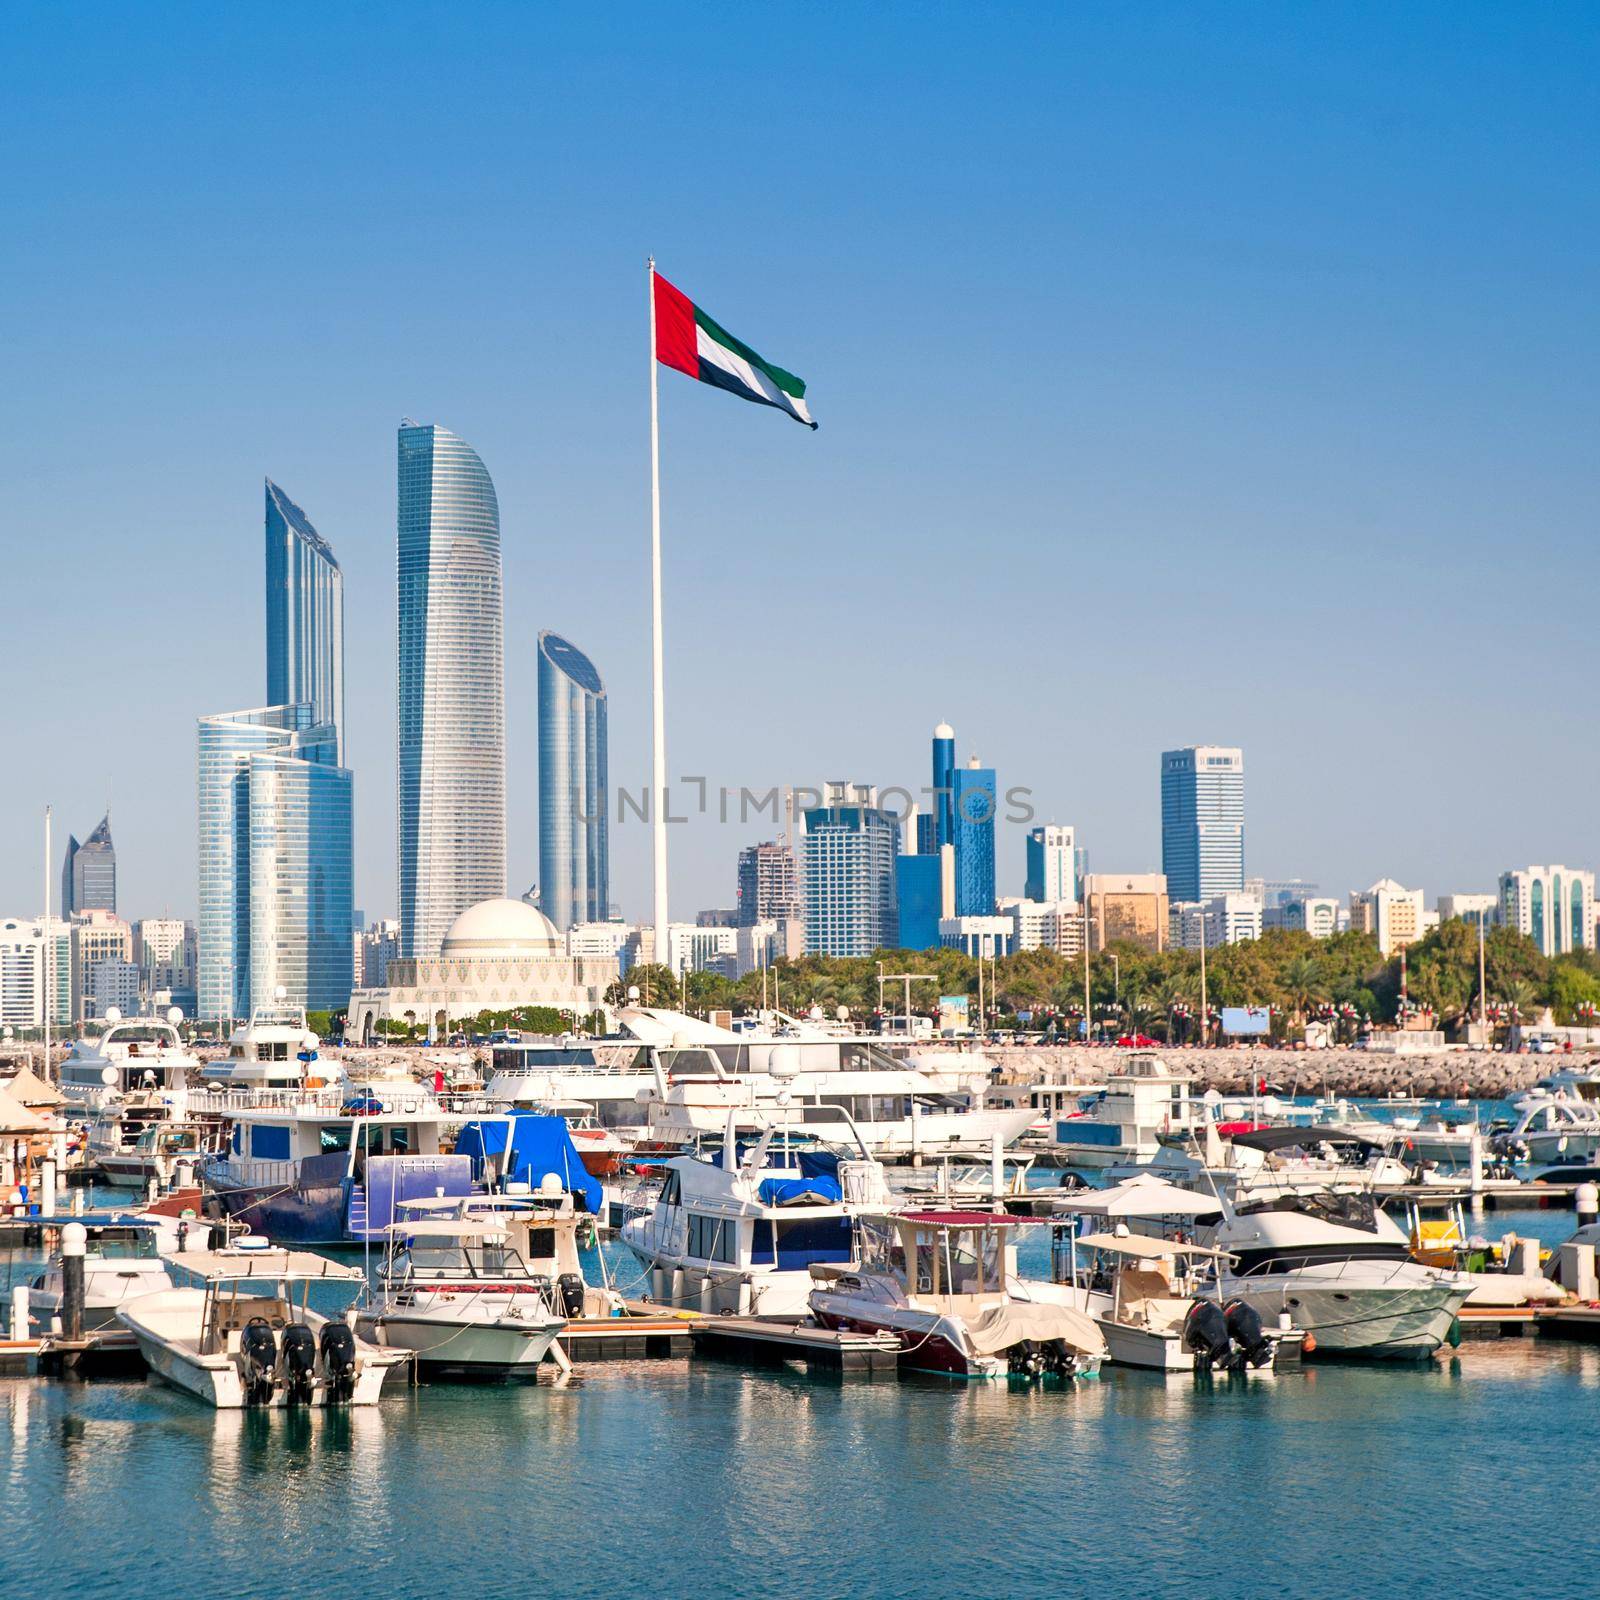 quay with yachts and skyscrapers in Abu Dhabi. UAE